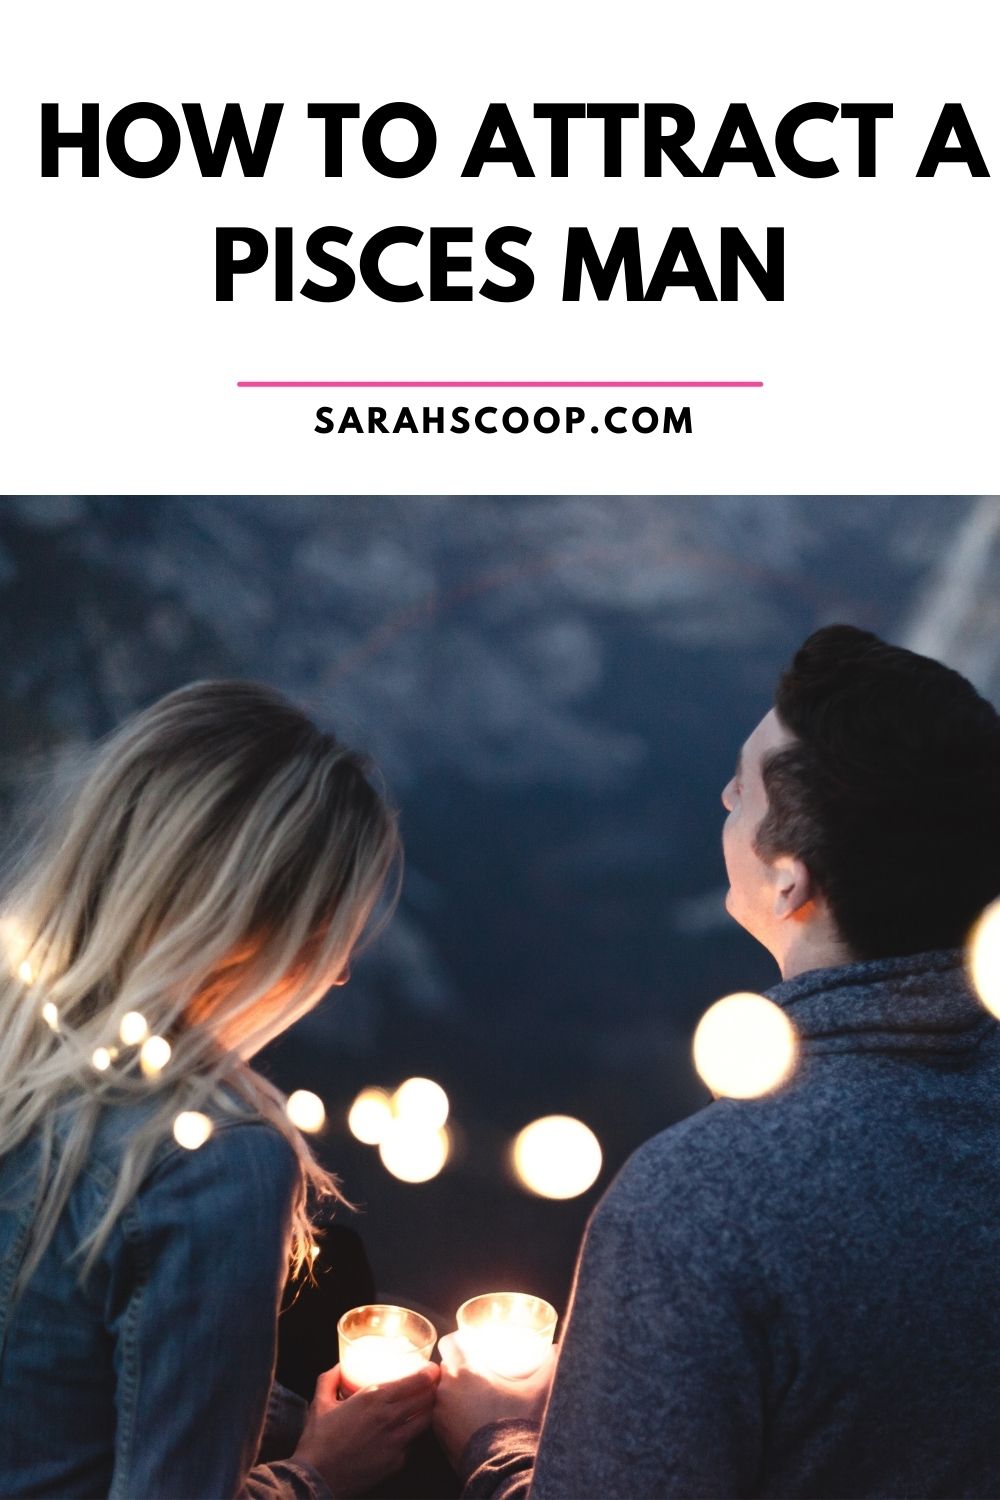 How to Attract A Pisces Man: 25 Ways - Sarah Scoop